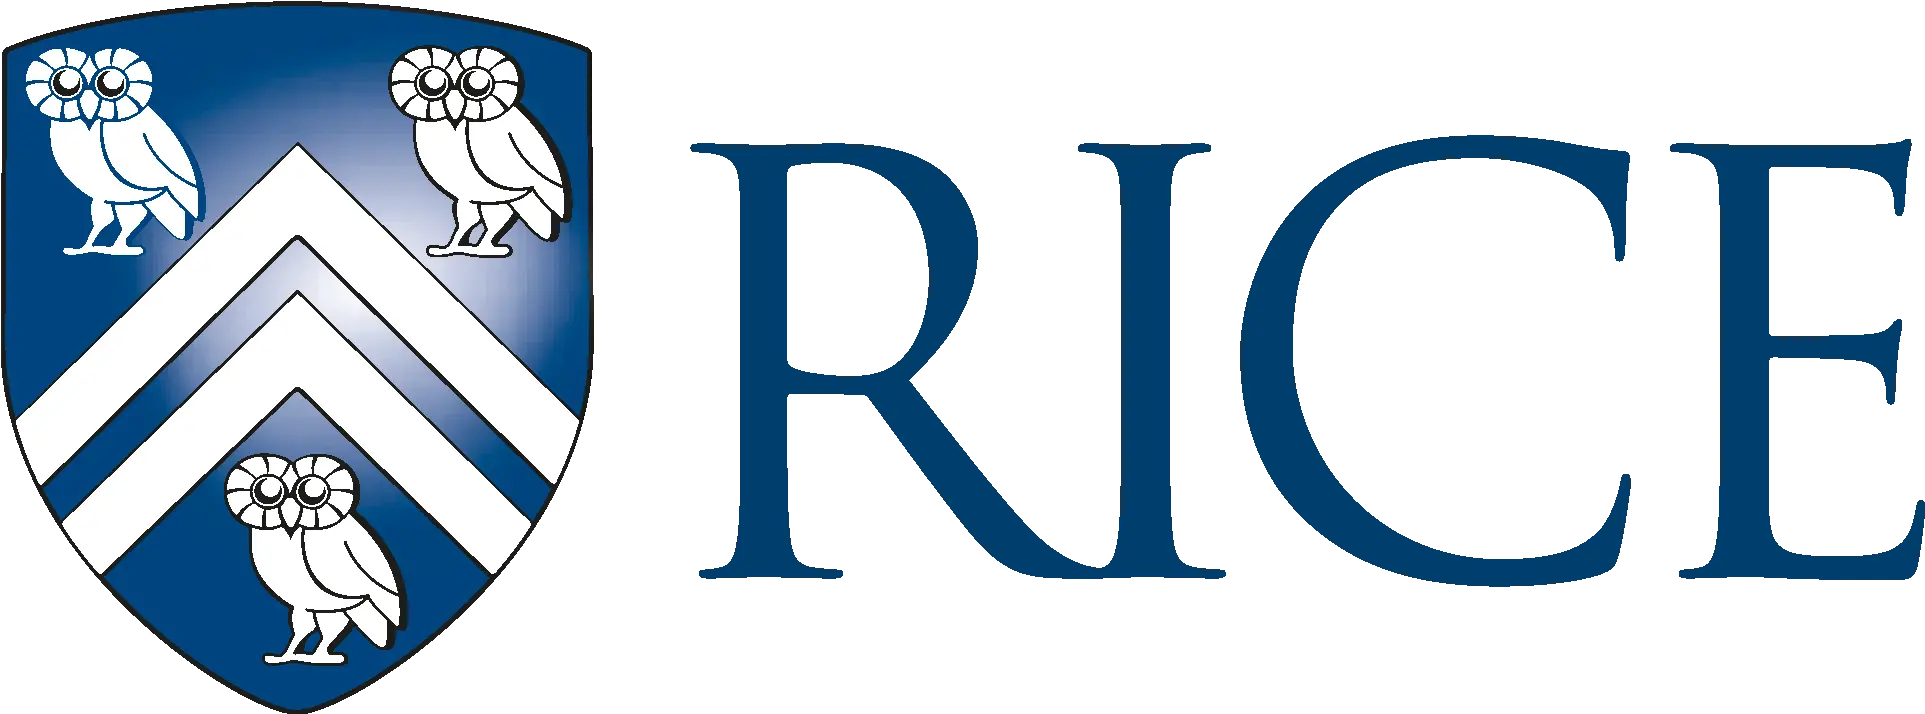 Rice University Logo And Seal Owls Download Vector Logo Rice University Texas Png Owls Png